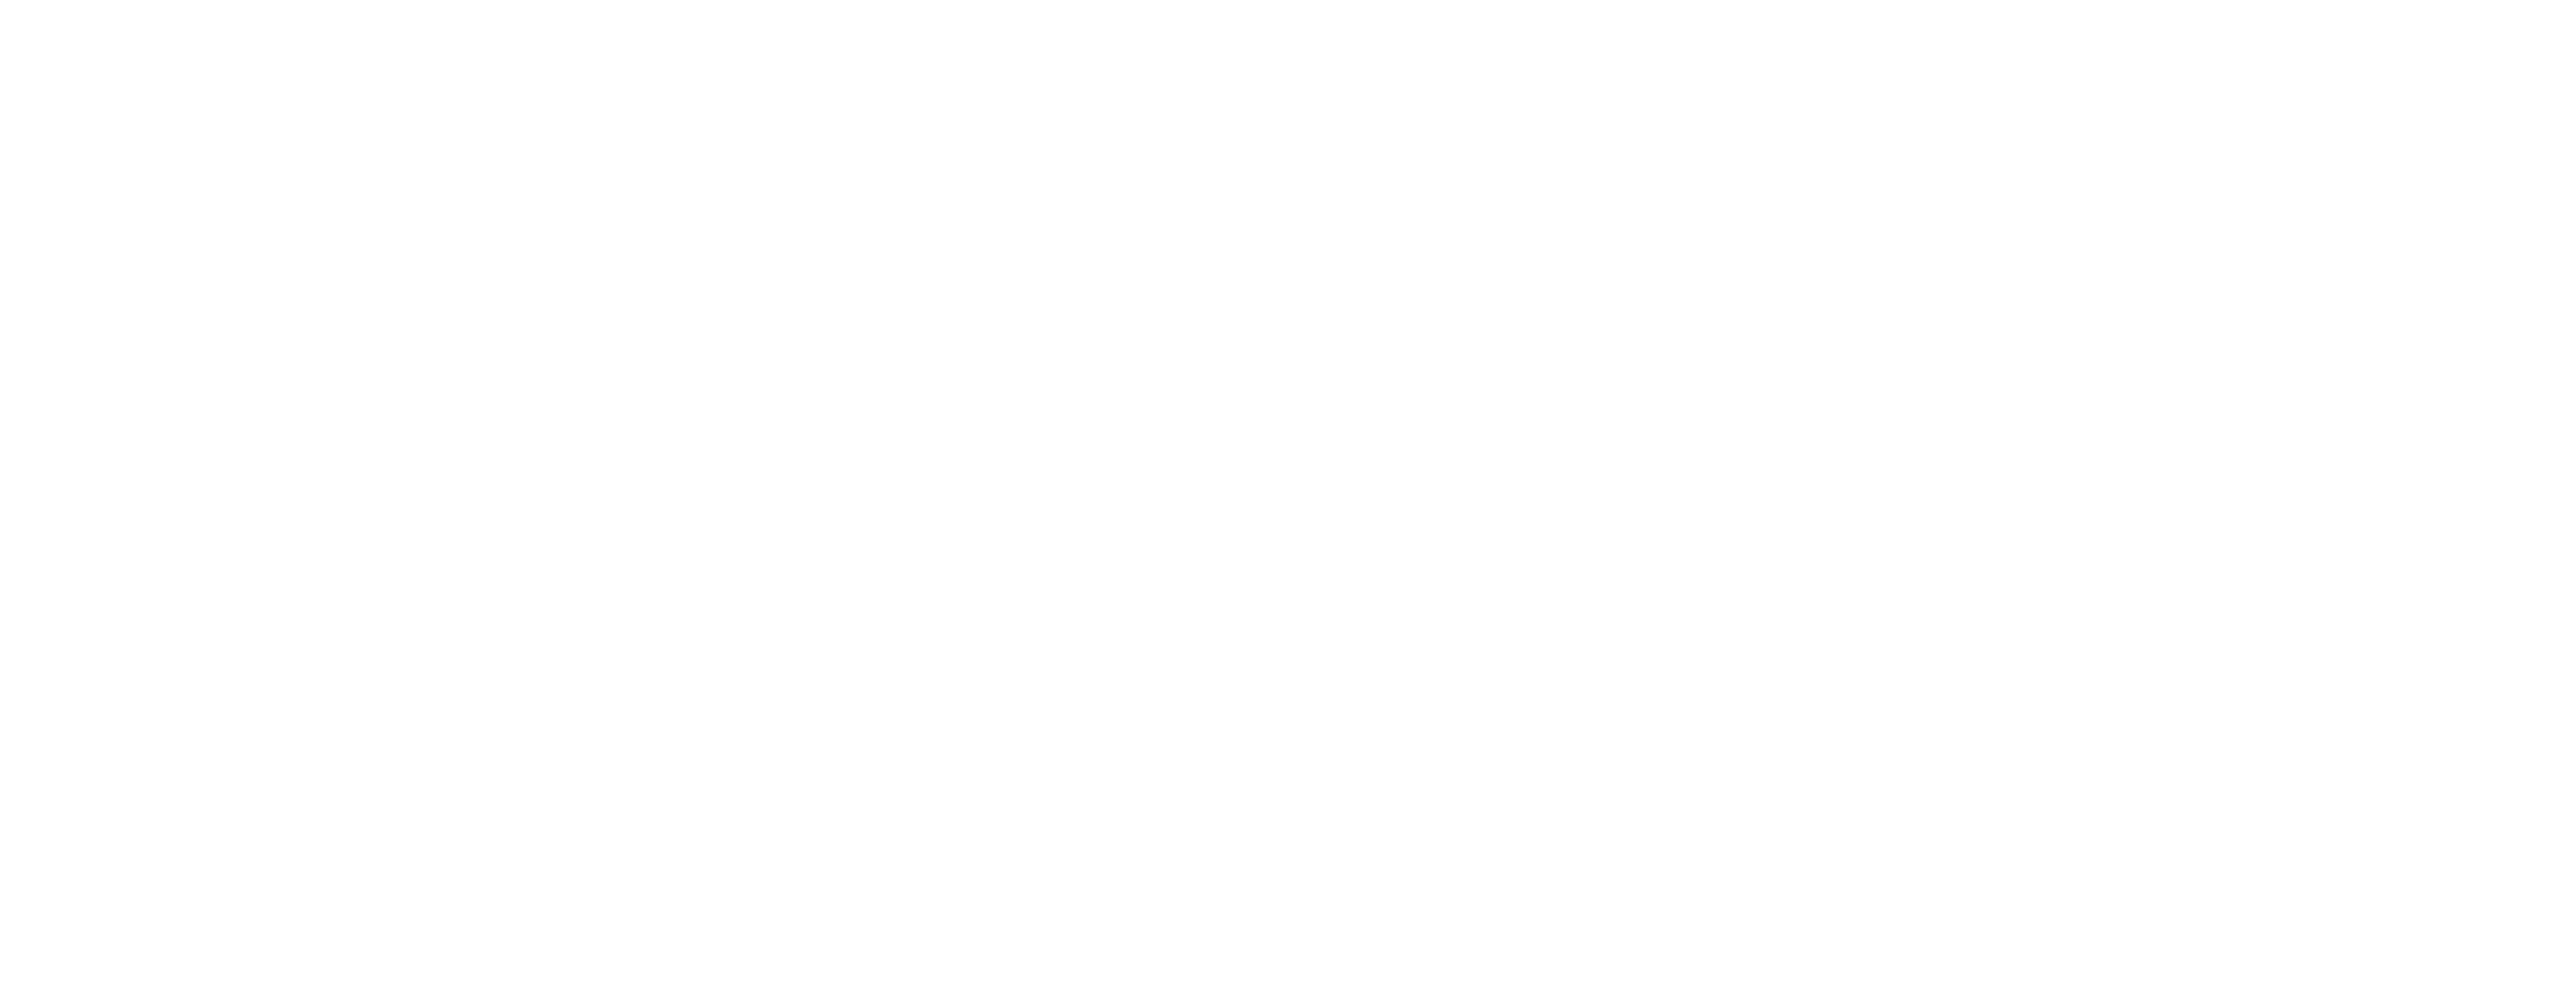 Research Solutions logo